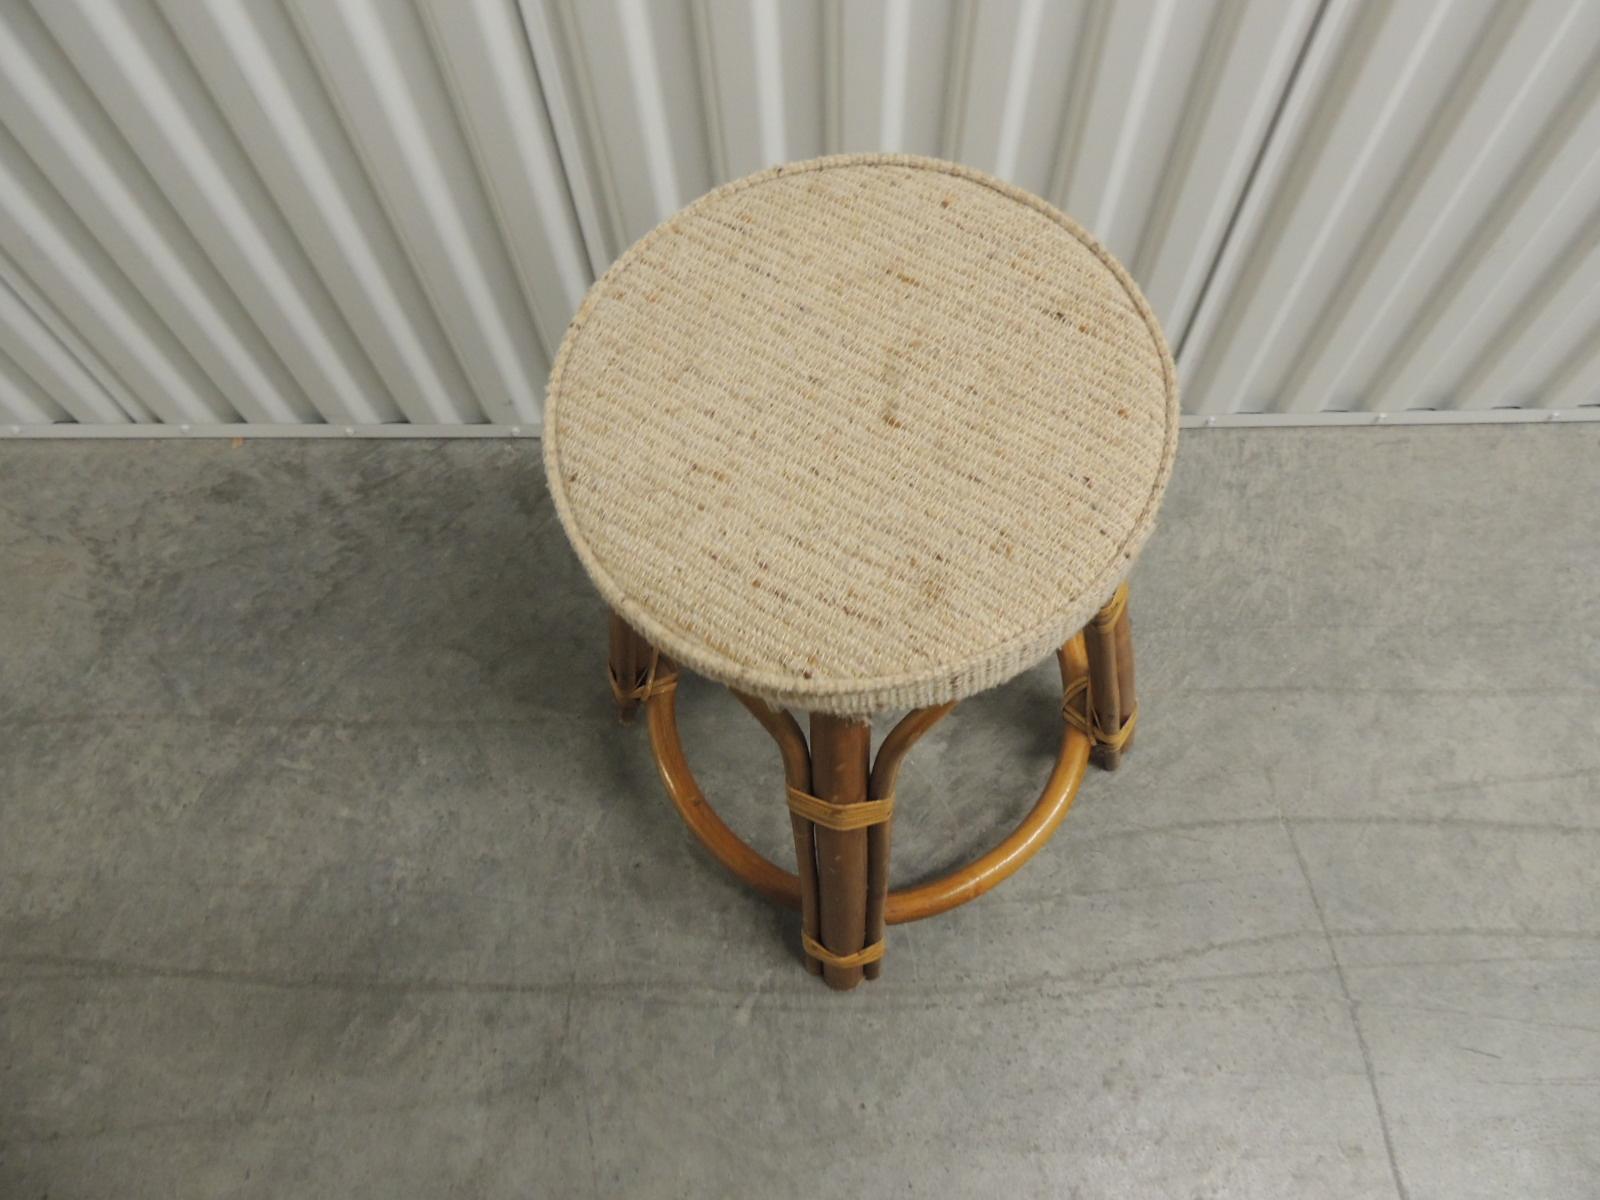 Vintage bamboo and rattan tall stool with upholstered round seat.
Bent bamboo tall stool with vintage beige bouclé fabric round seat.
Rattan details.
Size: 19.5 H x 12 D (base 18